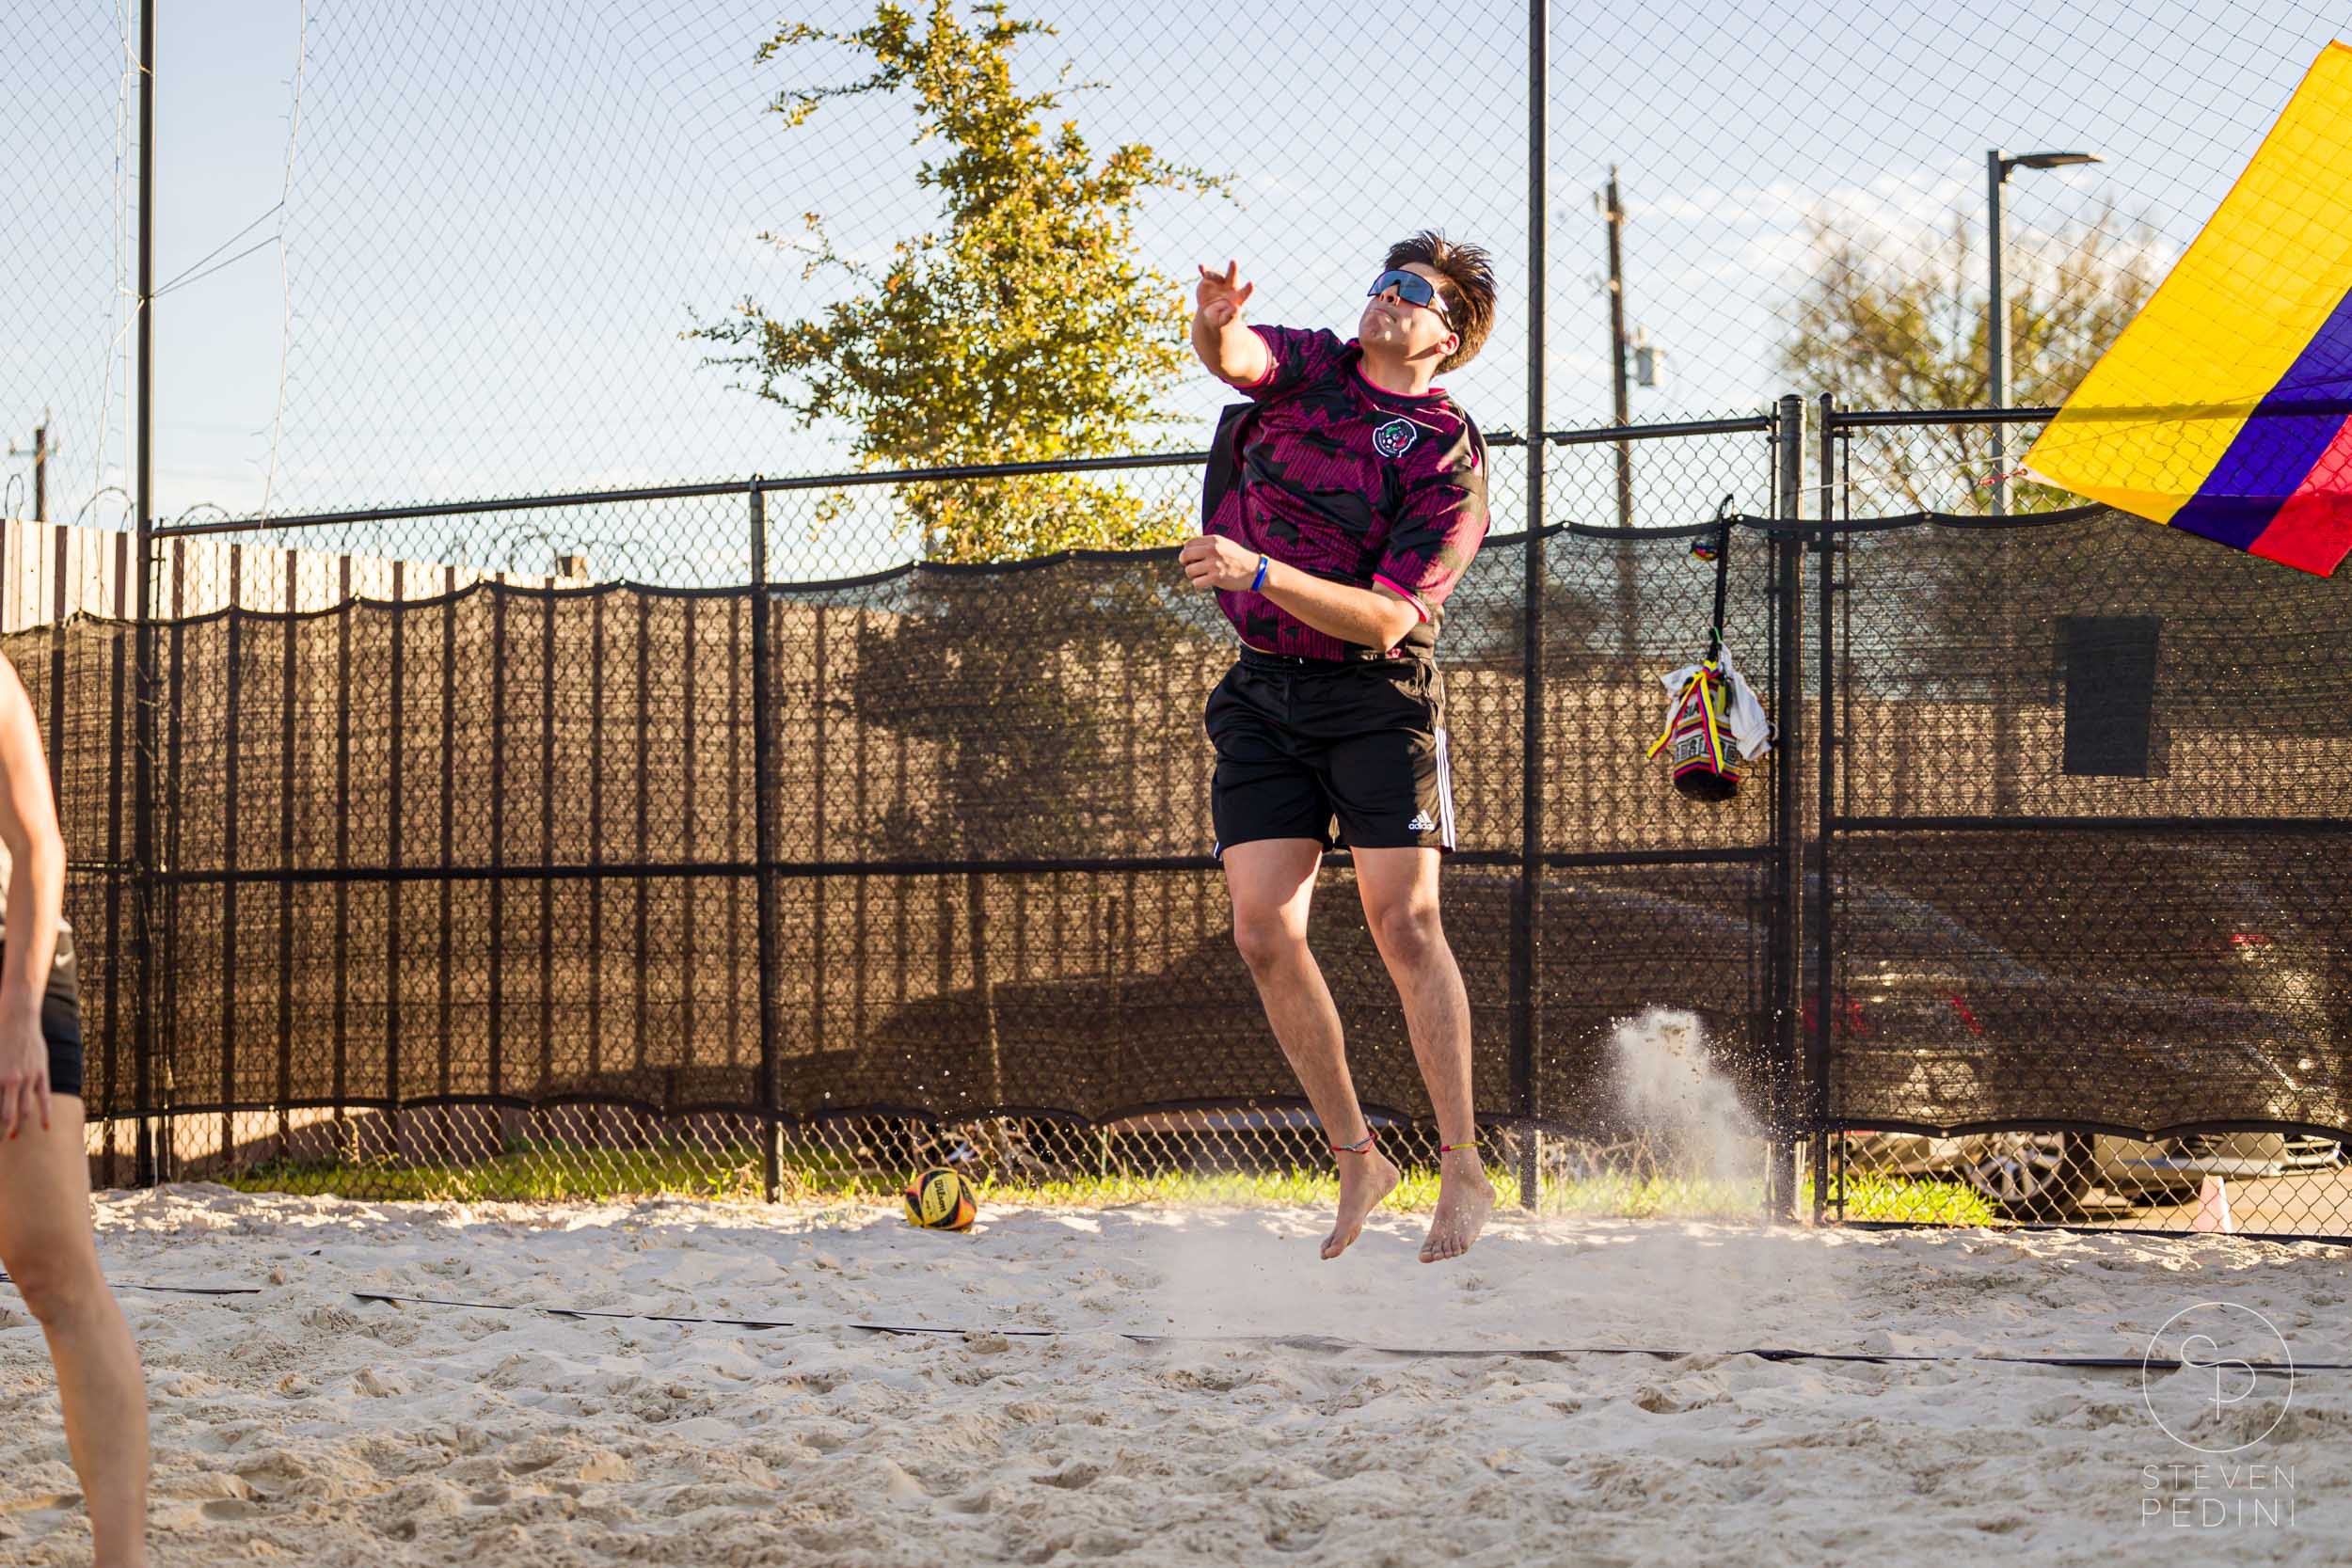 Steven Pedini Photography - Bumpy Pickle - Sand Volleyball - Houston TX - World Cup of Volleyball - 00132.jpg